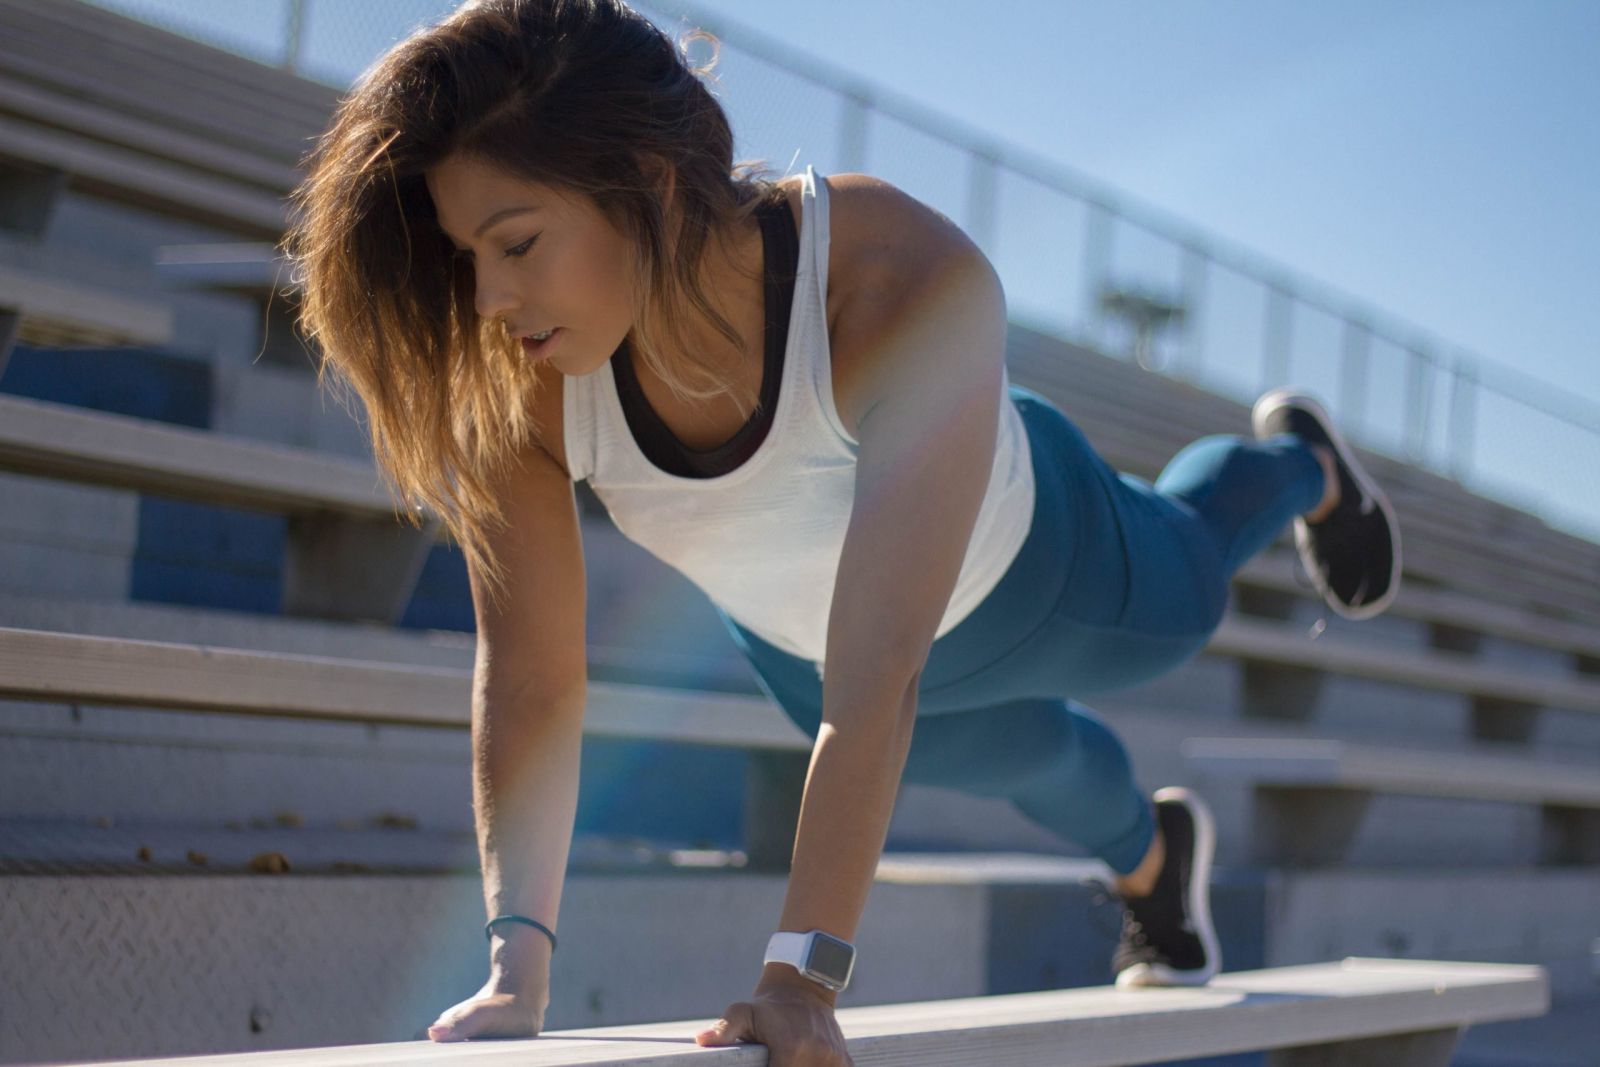 woman stretching on school benches